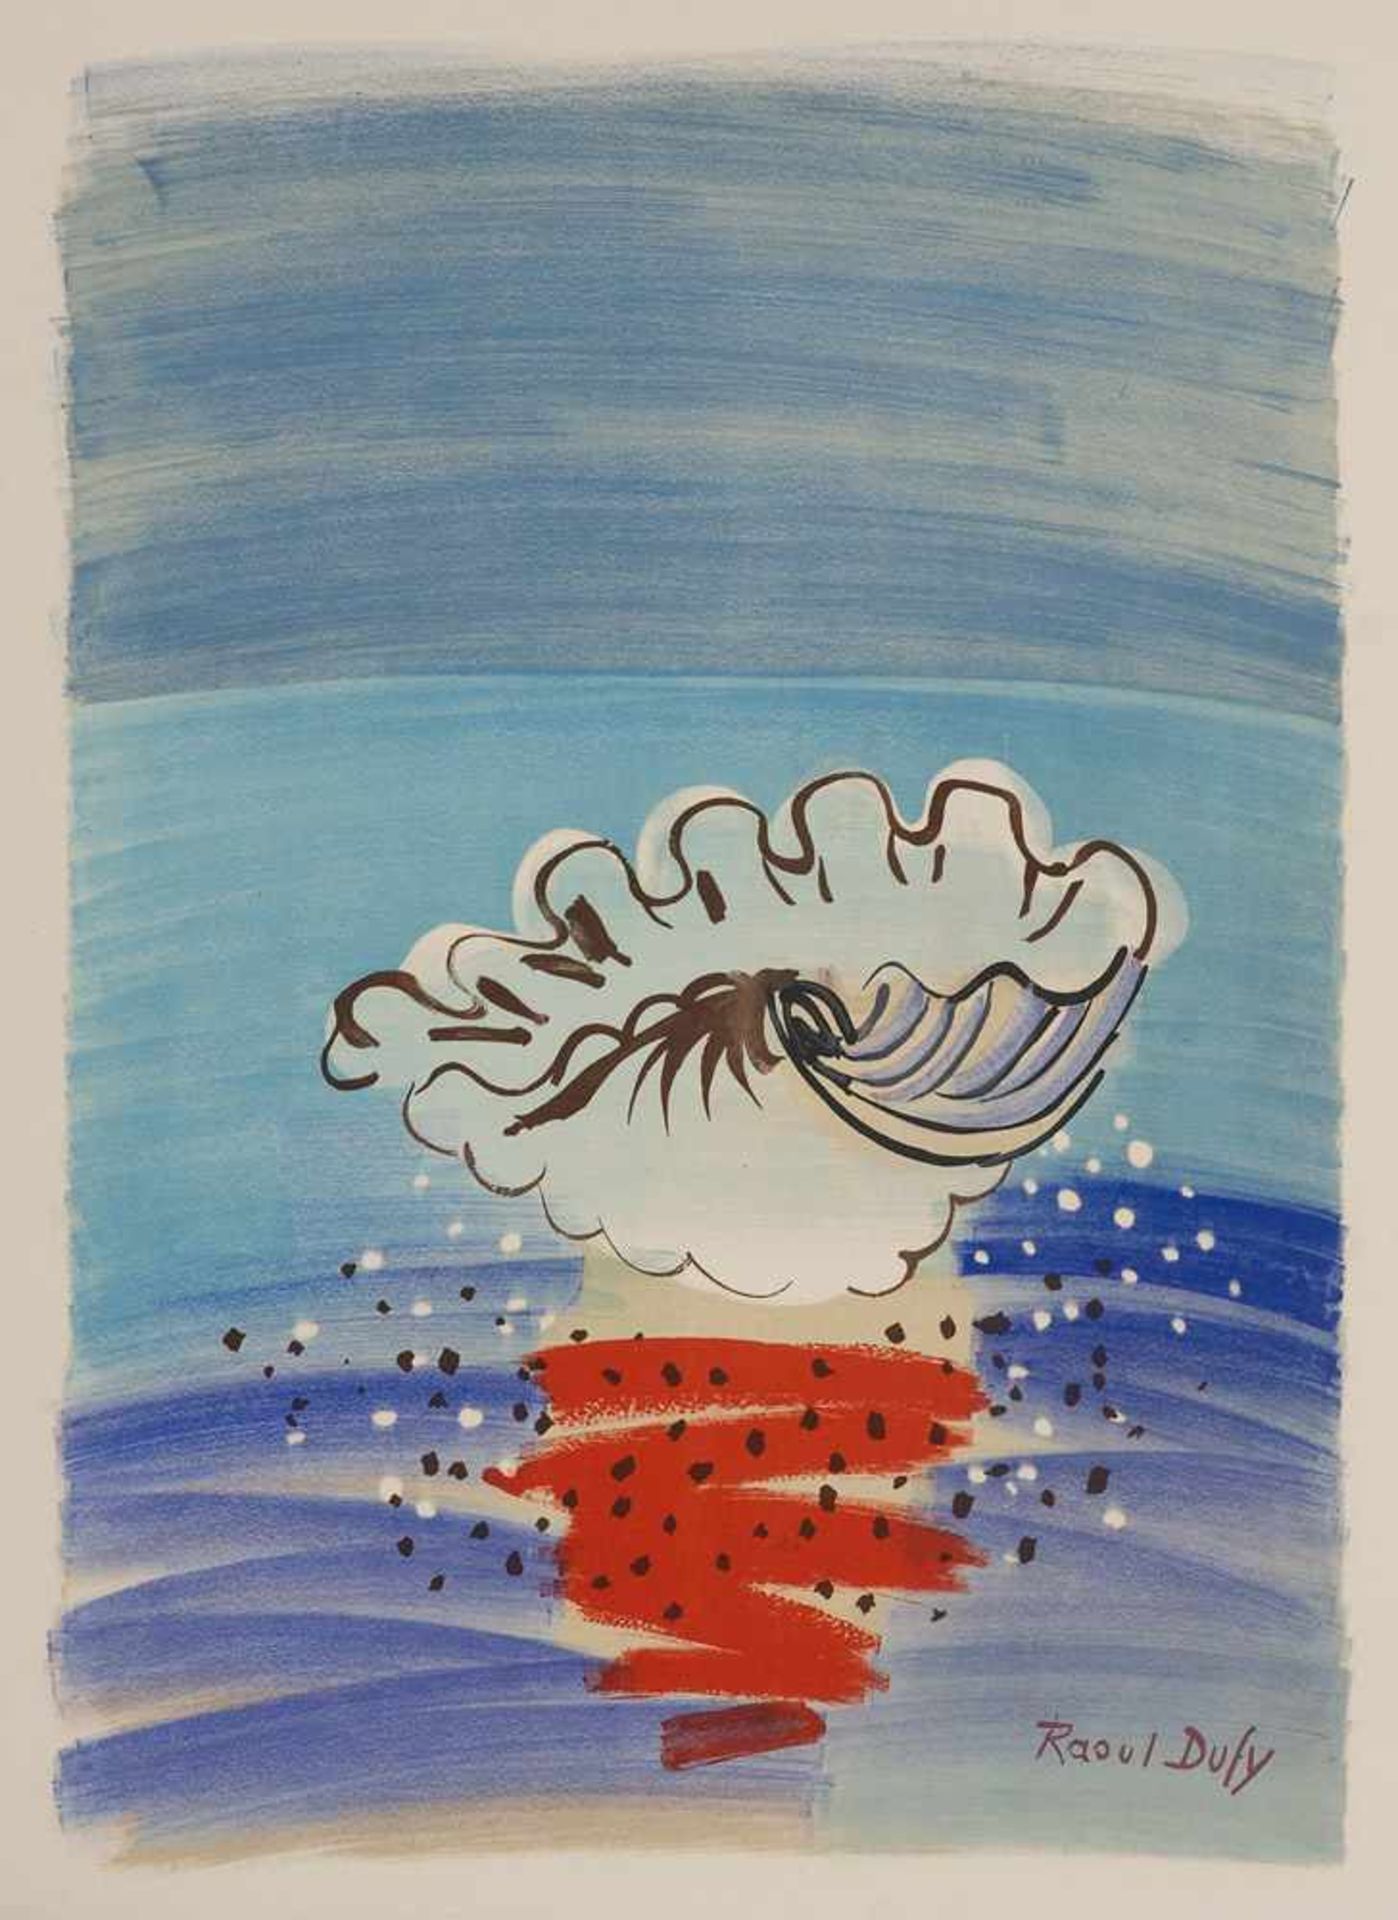 Dufy, Raoul (1877 Le Havre - 1953 Forcalquier)Le Coquillage. 1956. Farblithographie auf